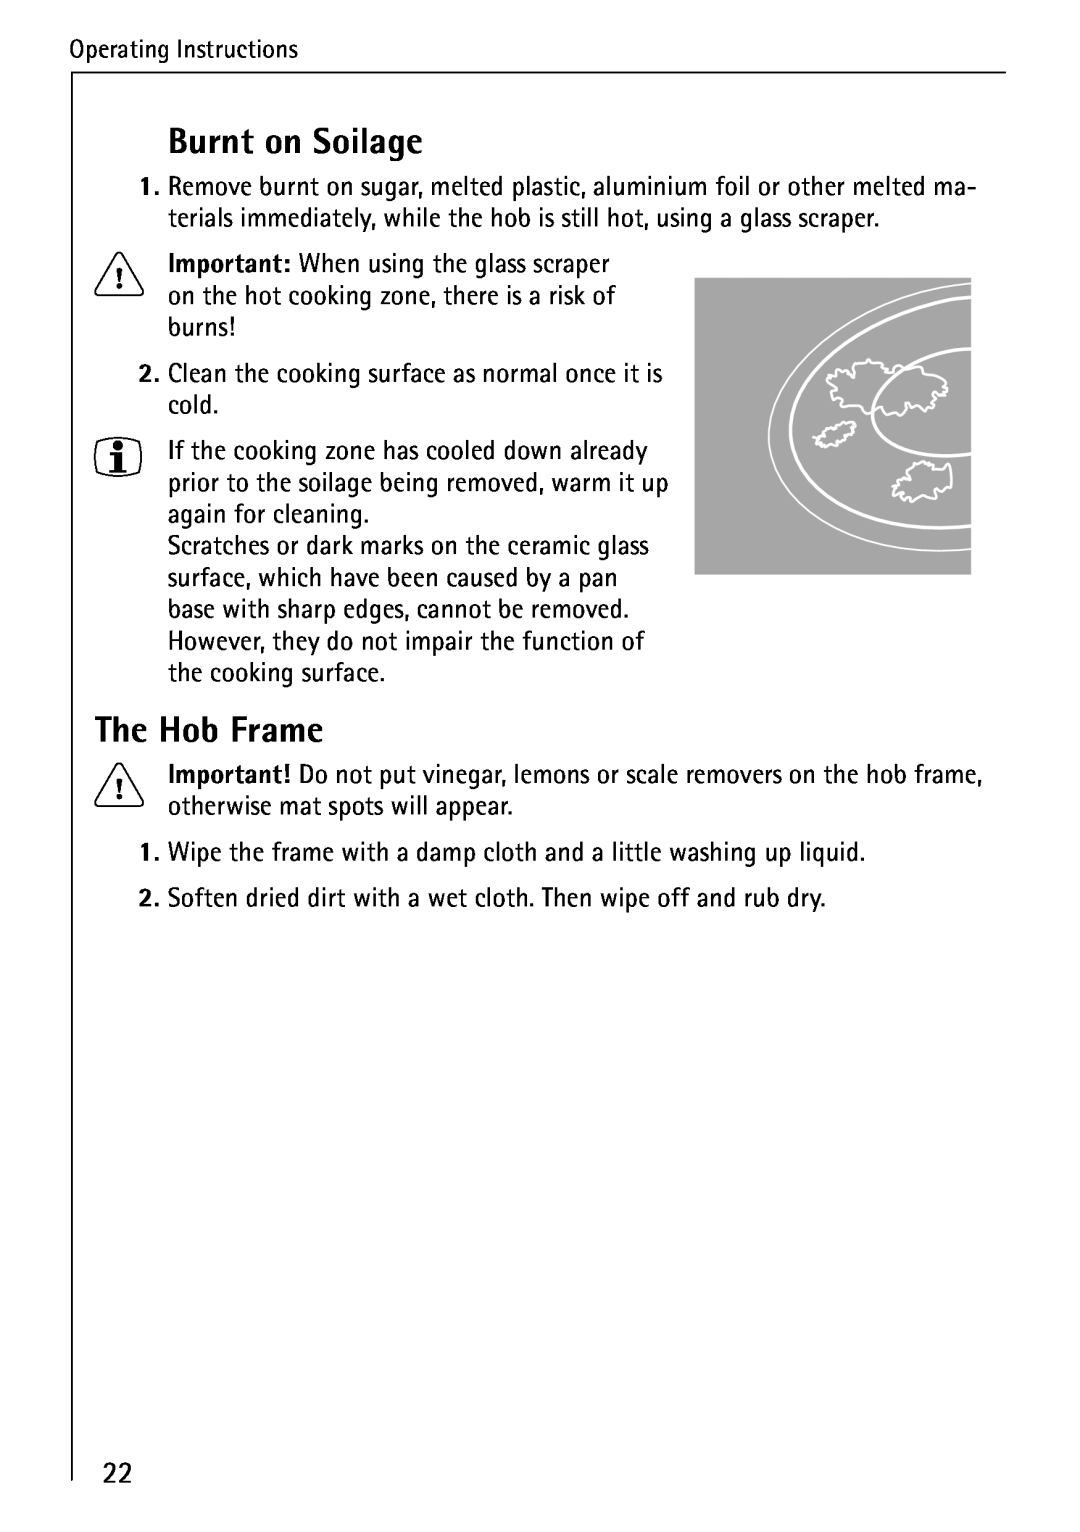 Electrolux 65300KF-an operating instructions Burnt on Soilage, The Hob Frame 